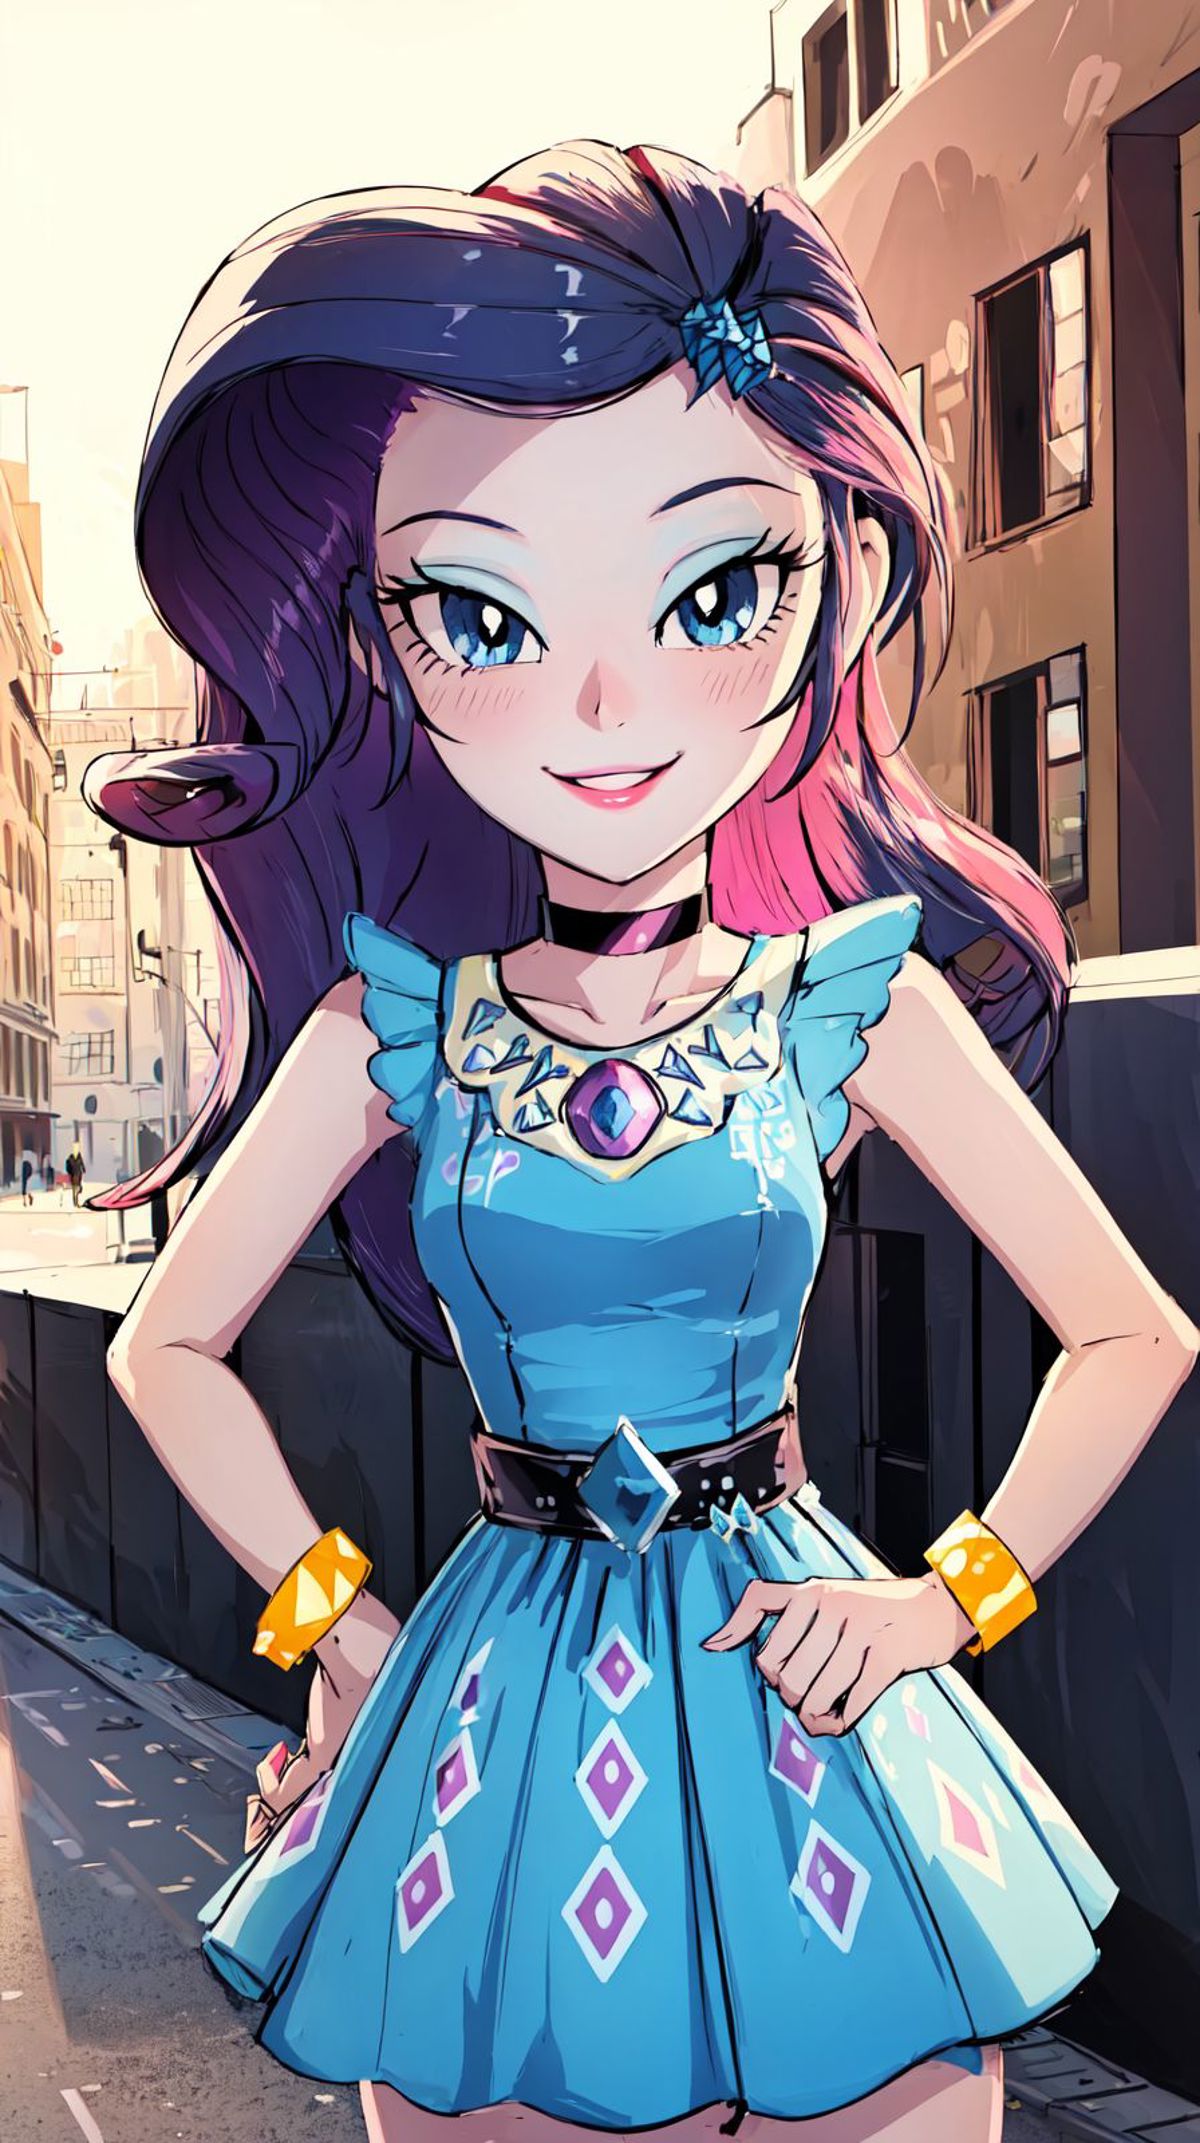 Rarity | My Little Pony / Equestria Girls image by marusame